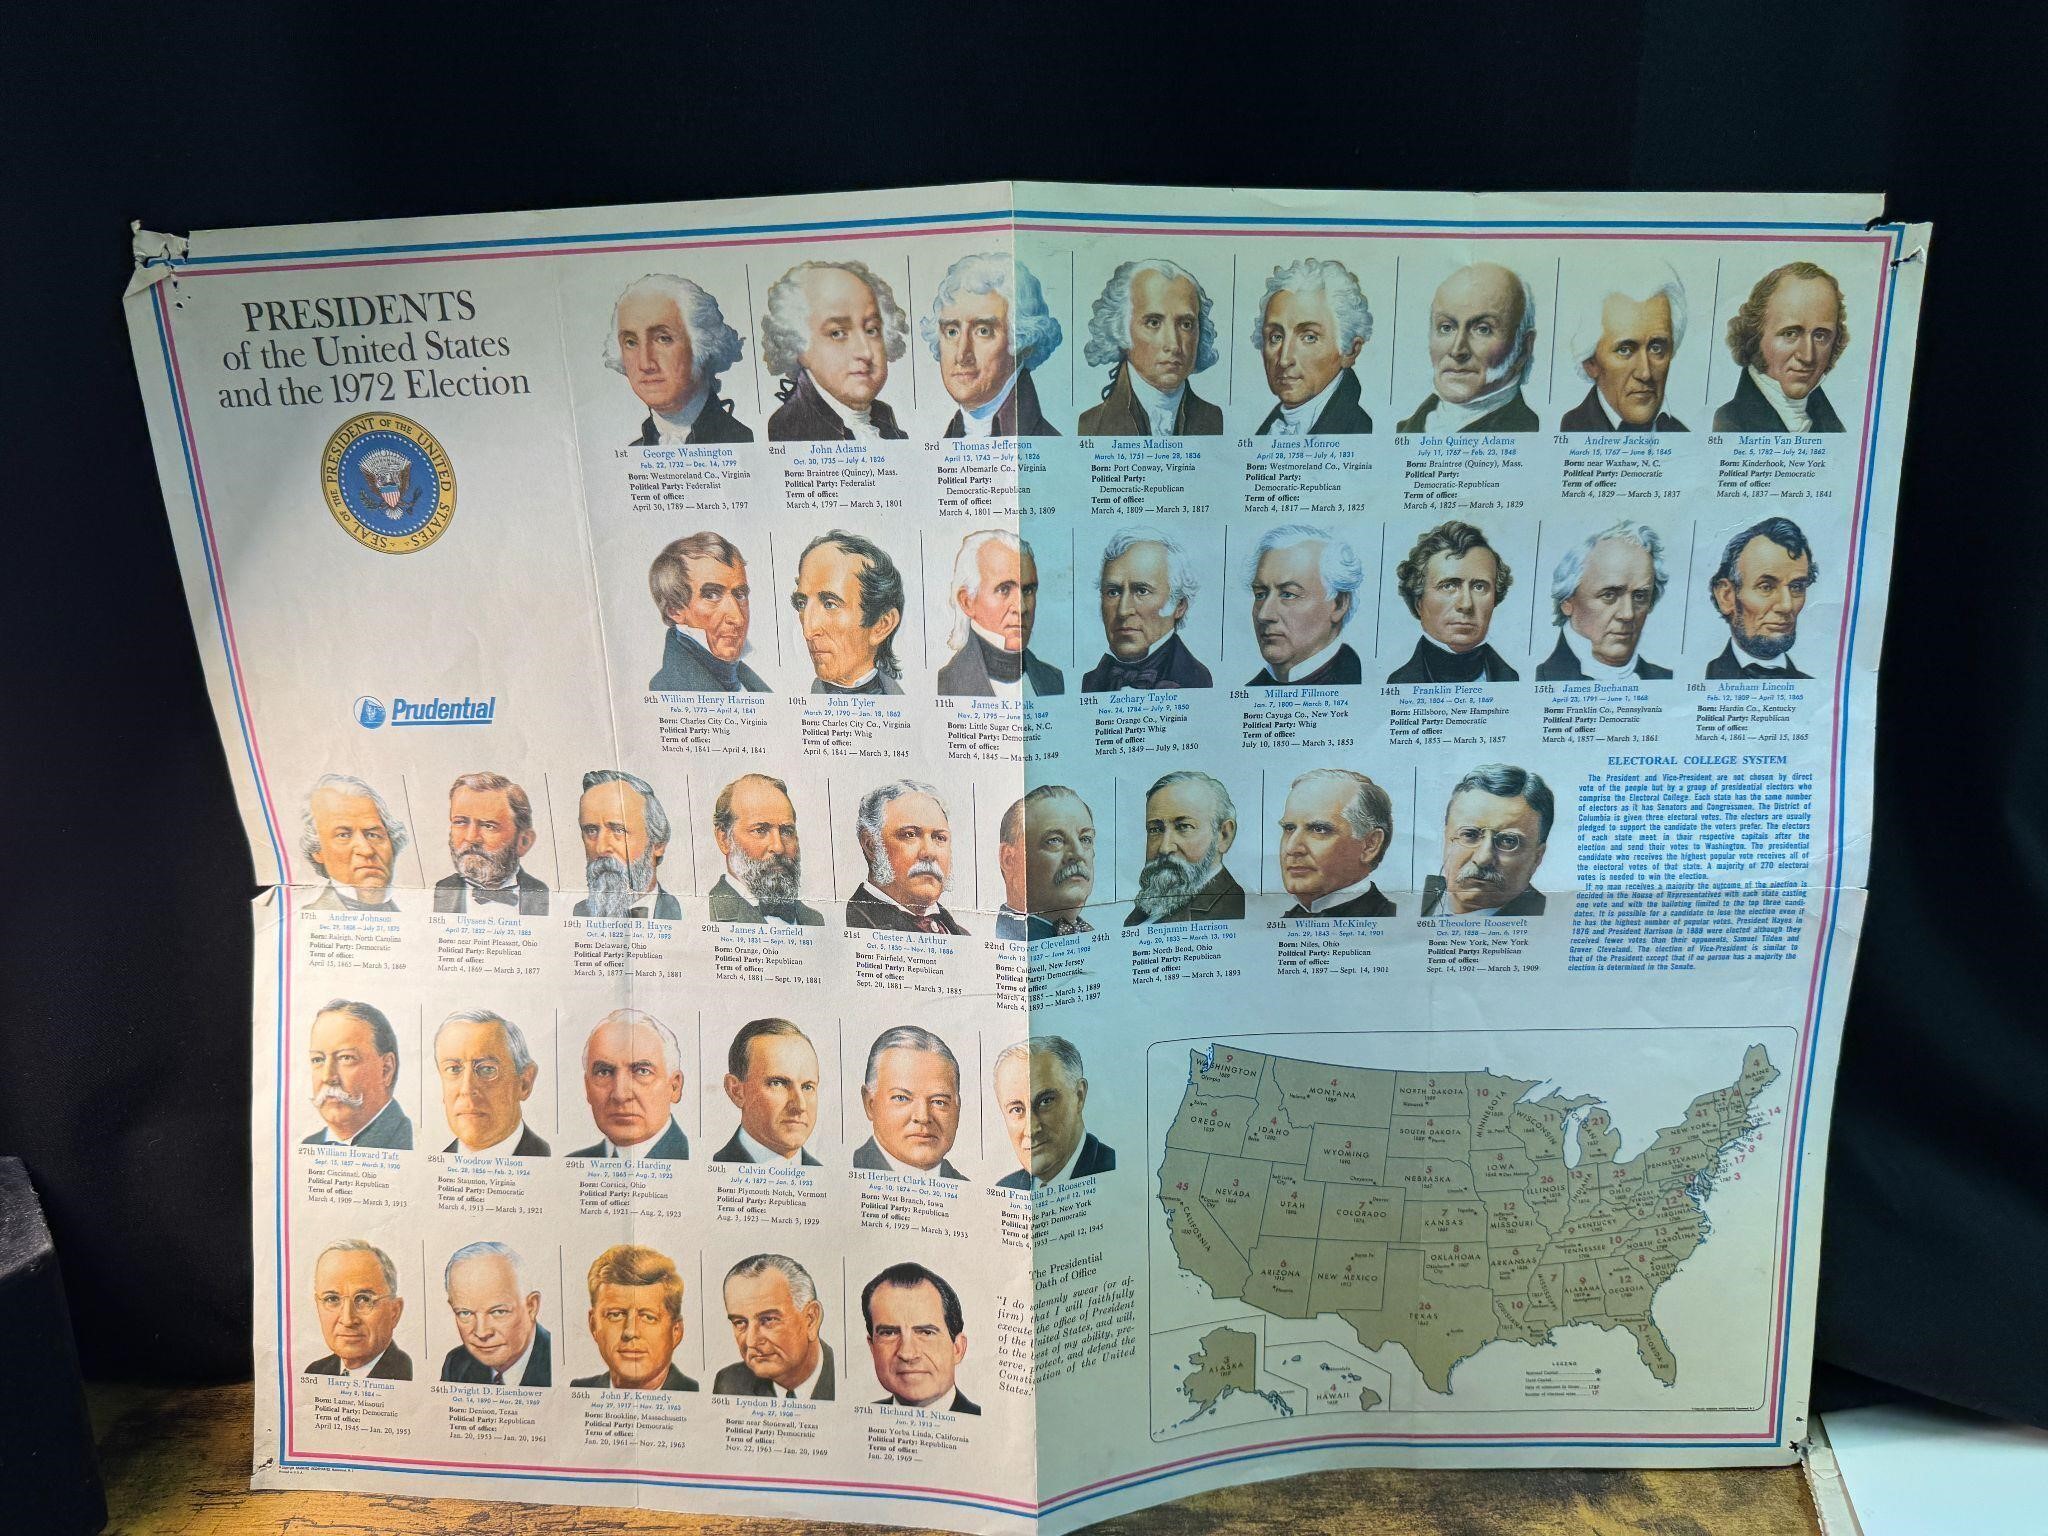 1972 PRESIDENTS OF THE UNITED STATES ELECTORAL MAP